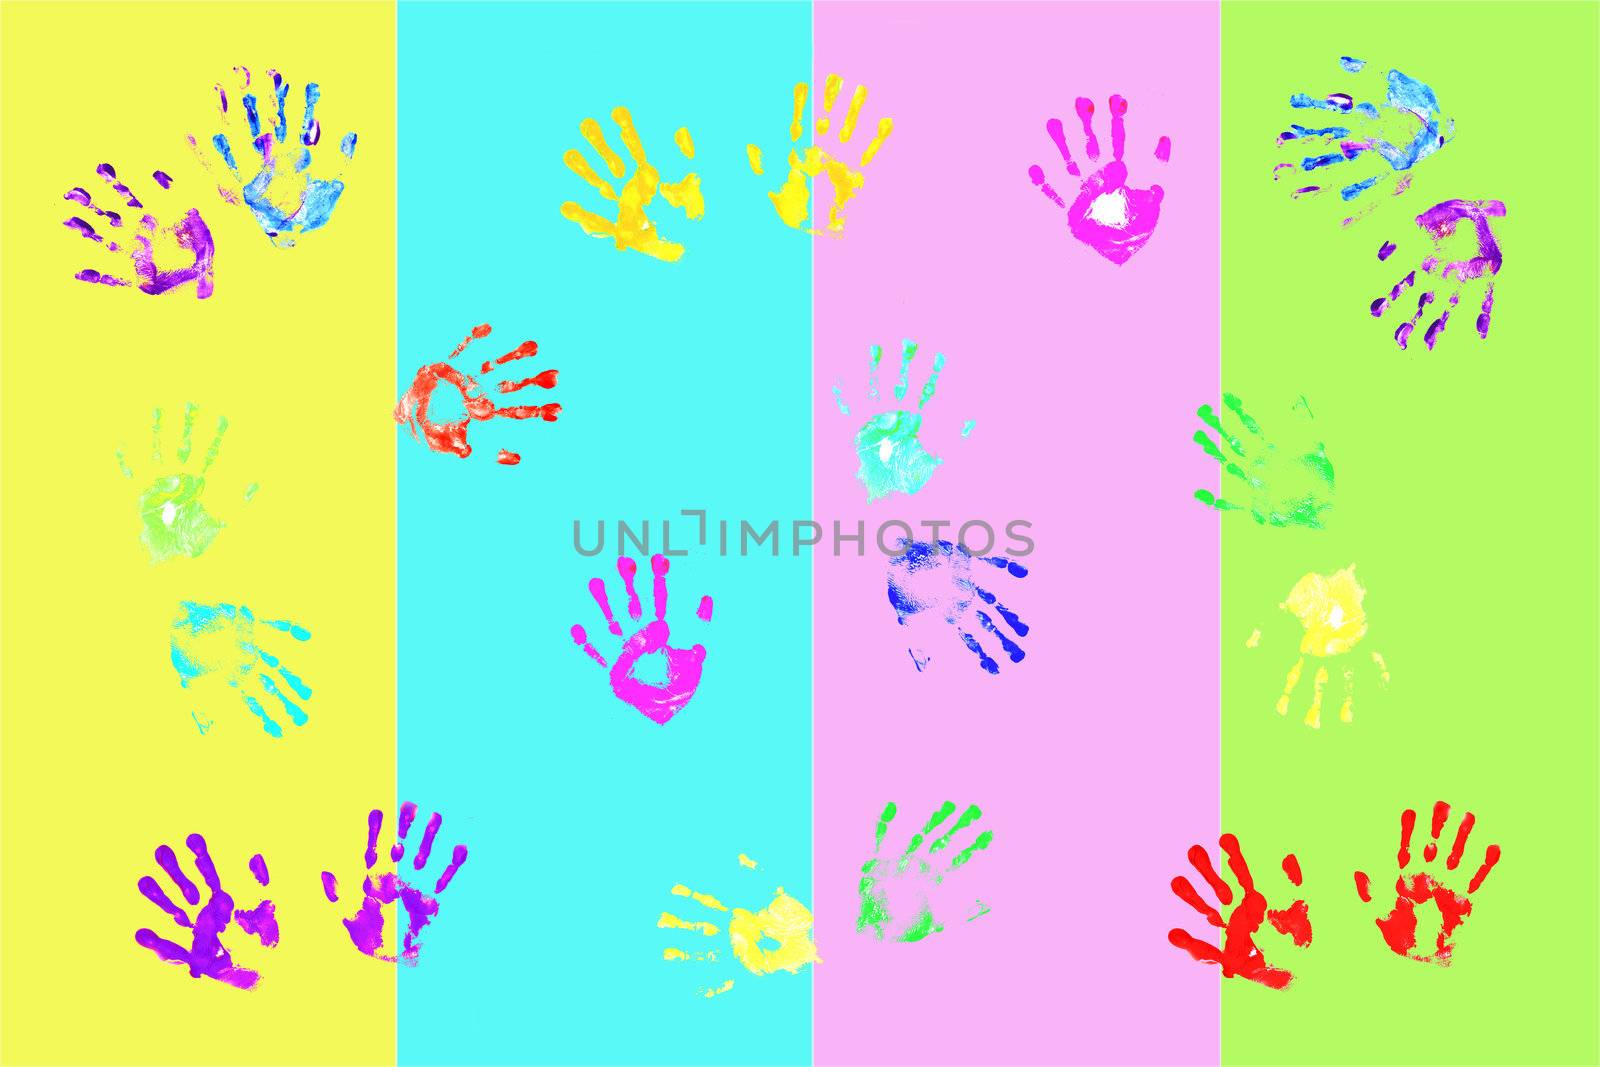 Actual handprints made by children on colorful background by jarenwicklund